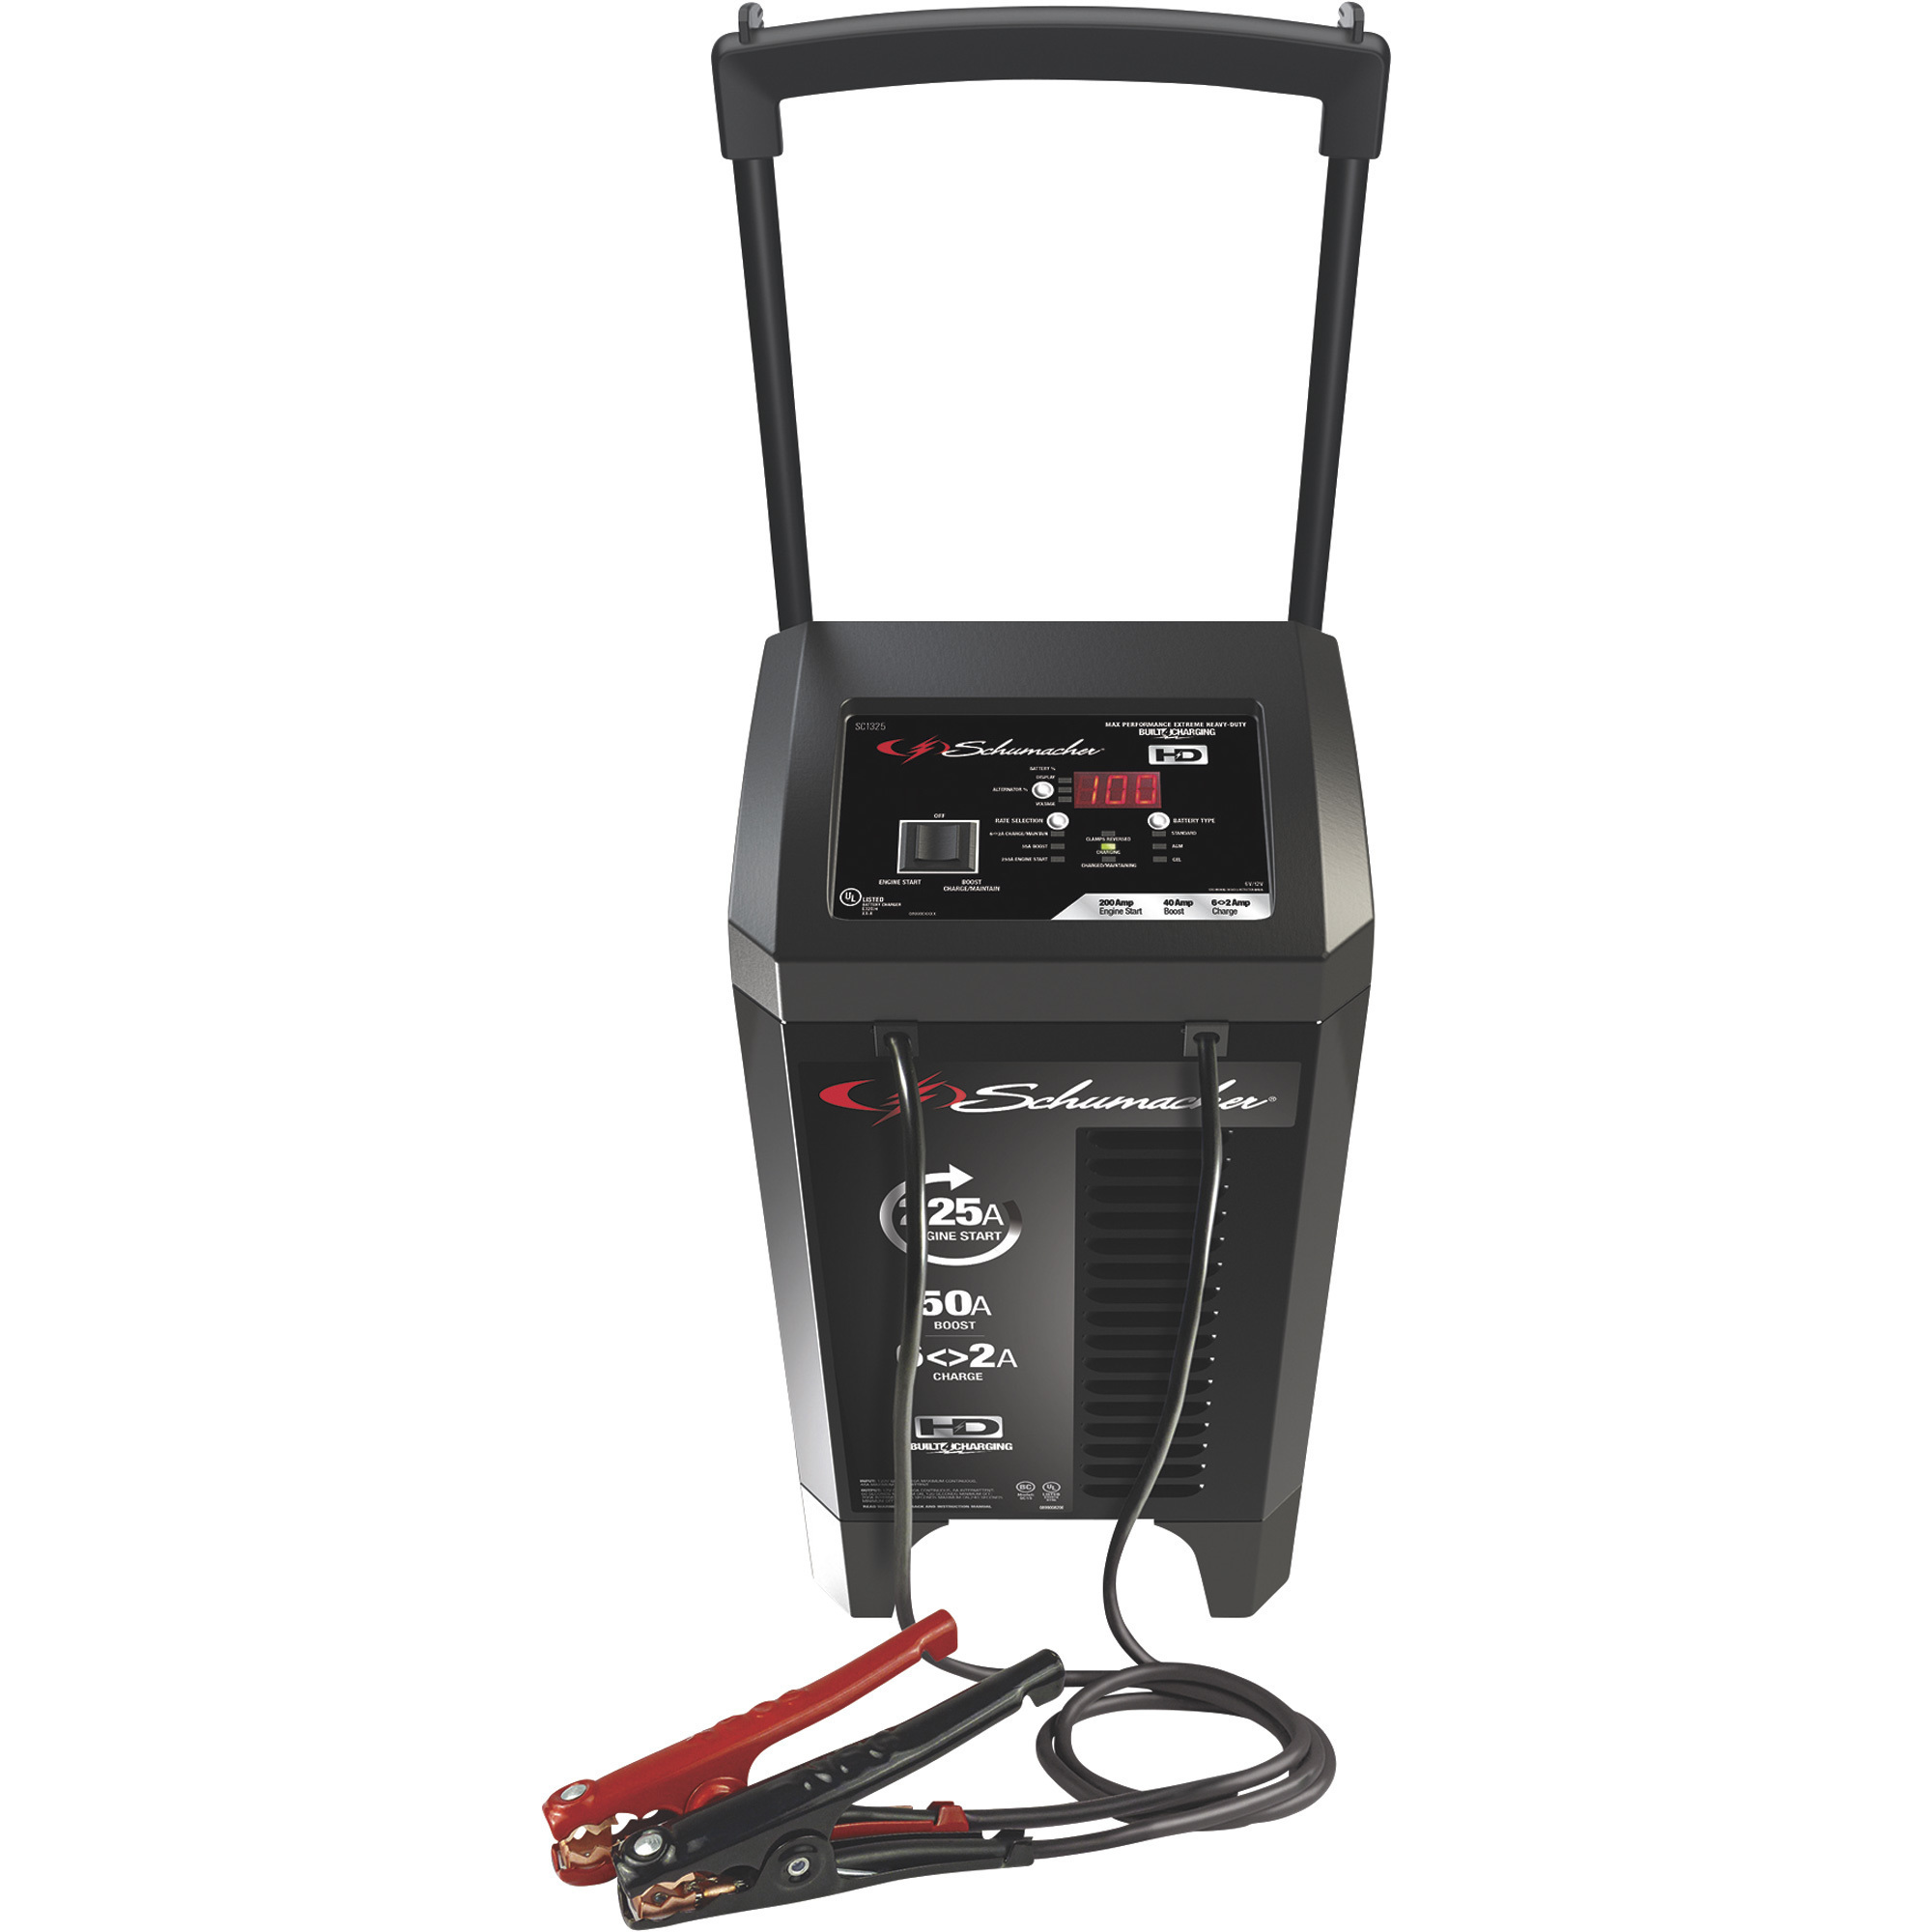 Schumacher Wheeled Battery Charger/Trickle Charger/Desulfator/Engine Starter, 250A Power, Digital Display, Overcharge Protection, Model SC1325